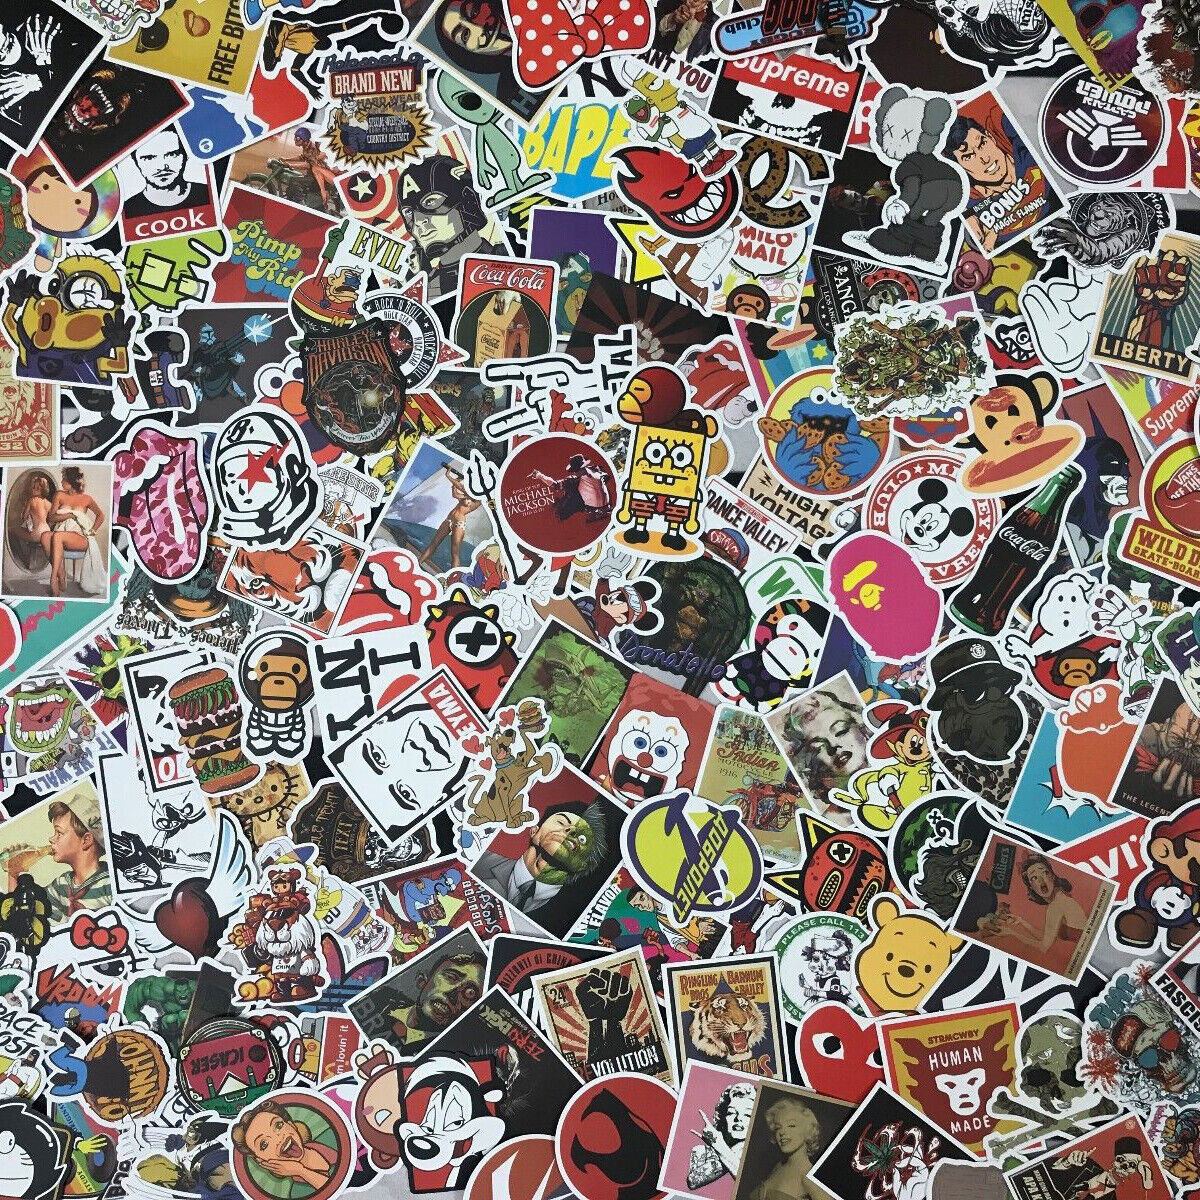 Lot 100 Random Vinyl Laptop Skateboard Stickers bomb Luggage Decals Dope Sticker Unbranded Does Not Apply